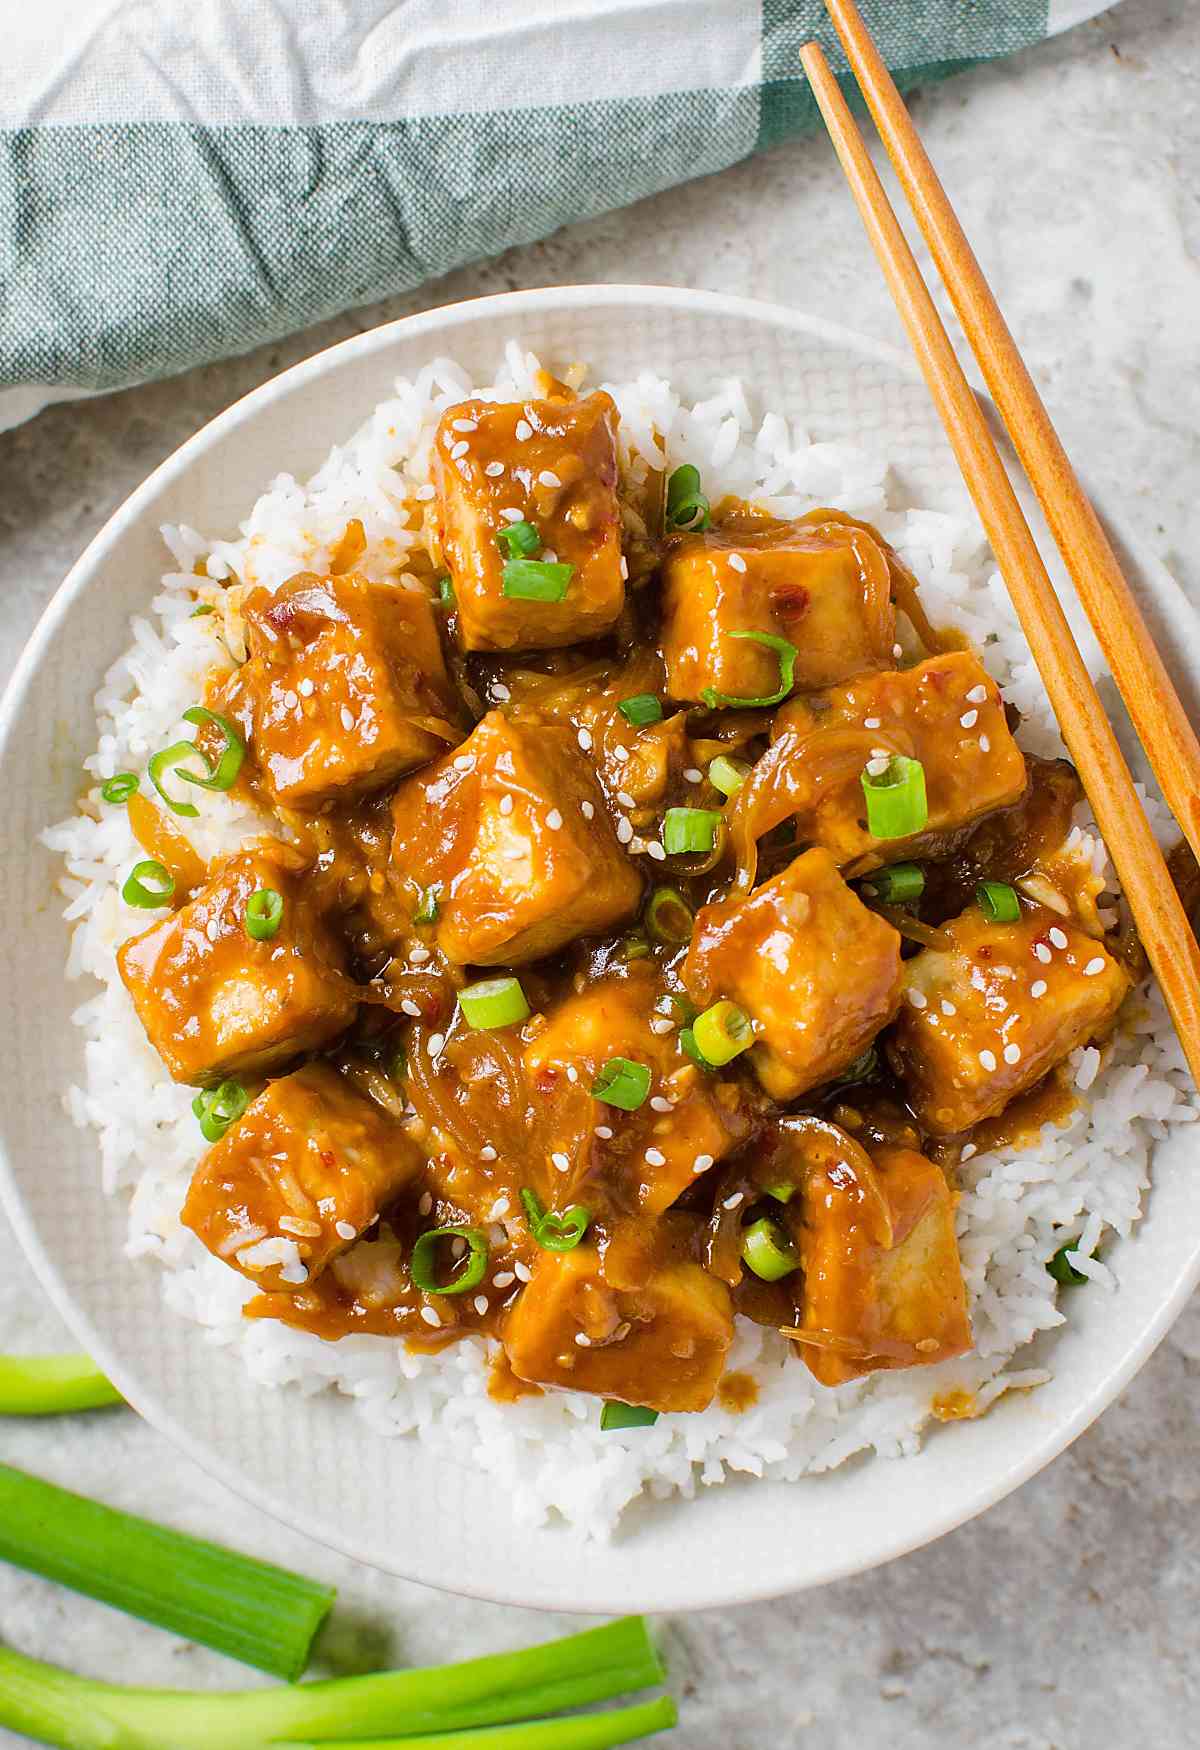 30 Min Healthy Asian Chili Garlic Tofu Stir Fry One Pan Meatless,Amazon Parrots In The Wild